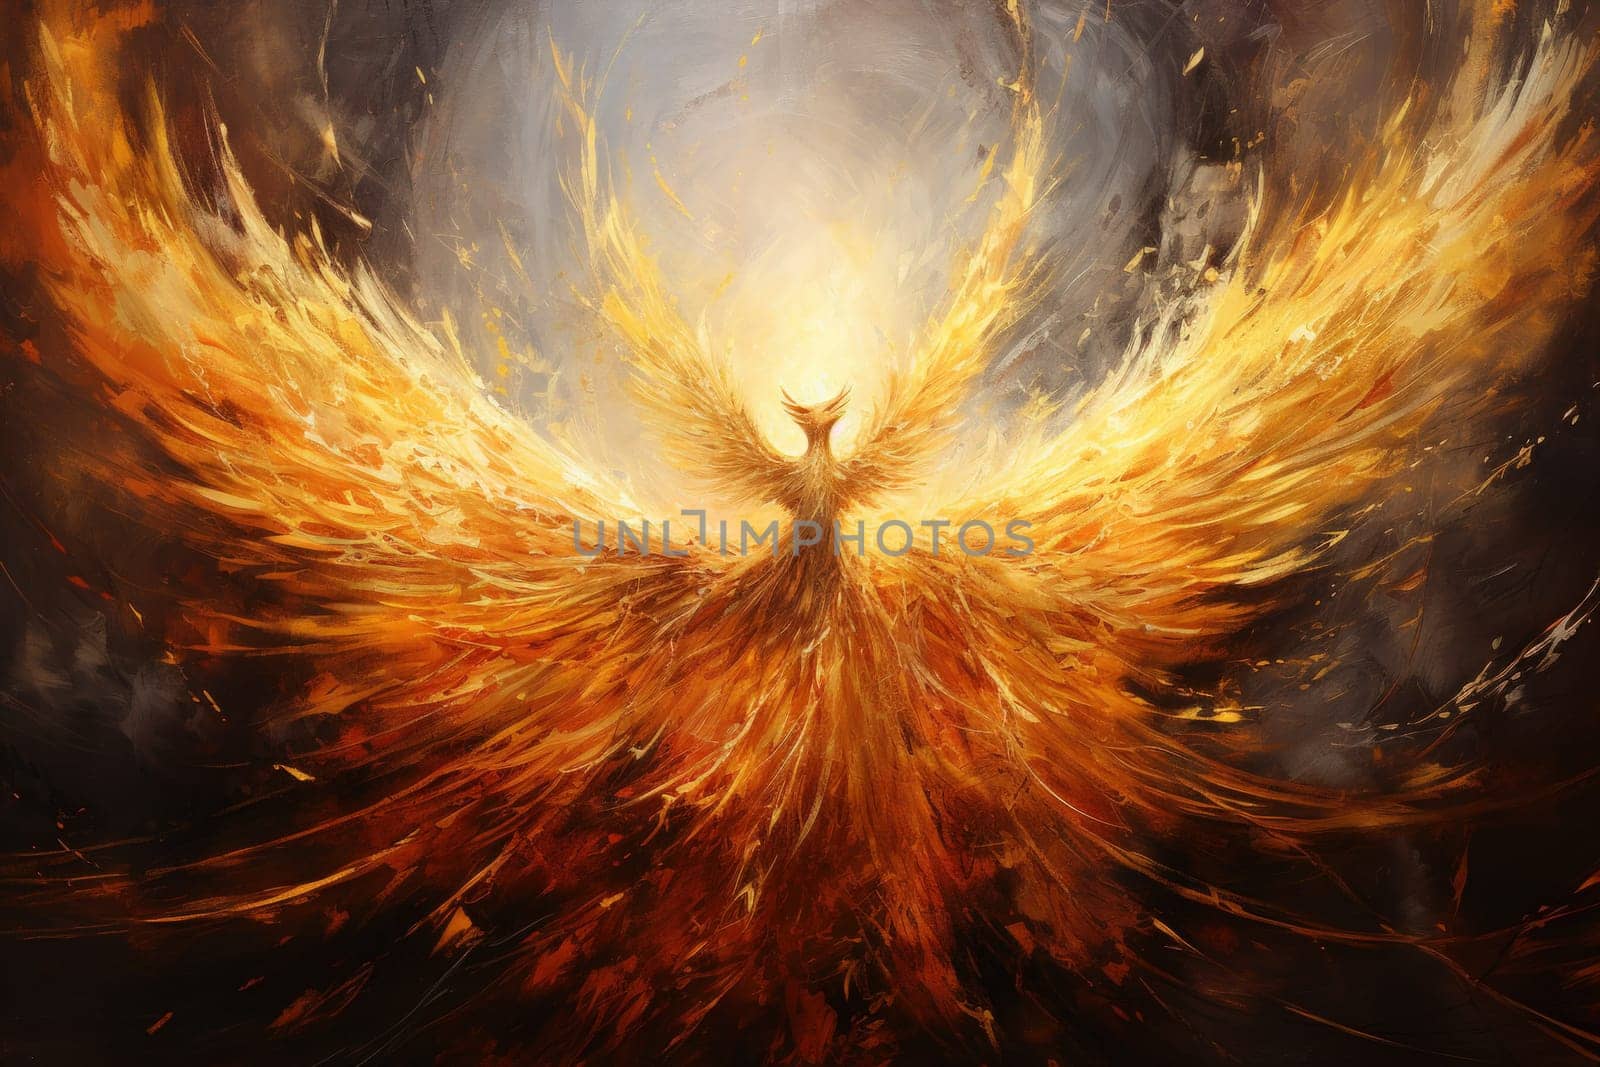 Behold the magnificent gilded phoenixes, radiant beings of myth and legend. With their resplendent feathers of gold and fire, they embody the eternal cycle of rebirth and resurrection.